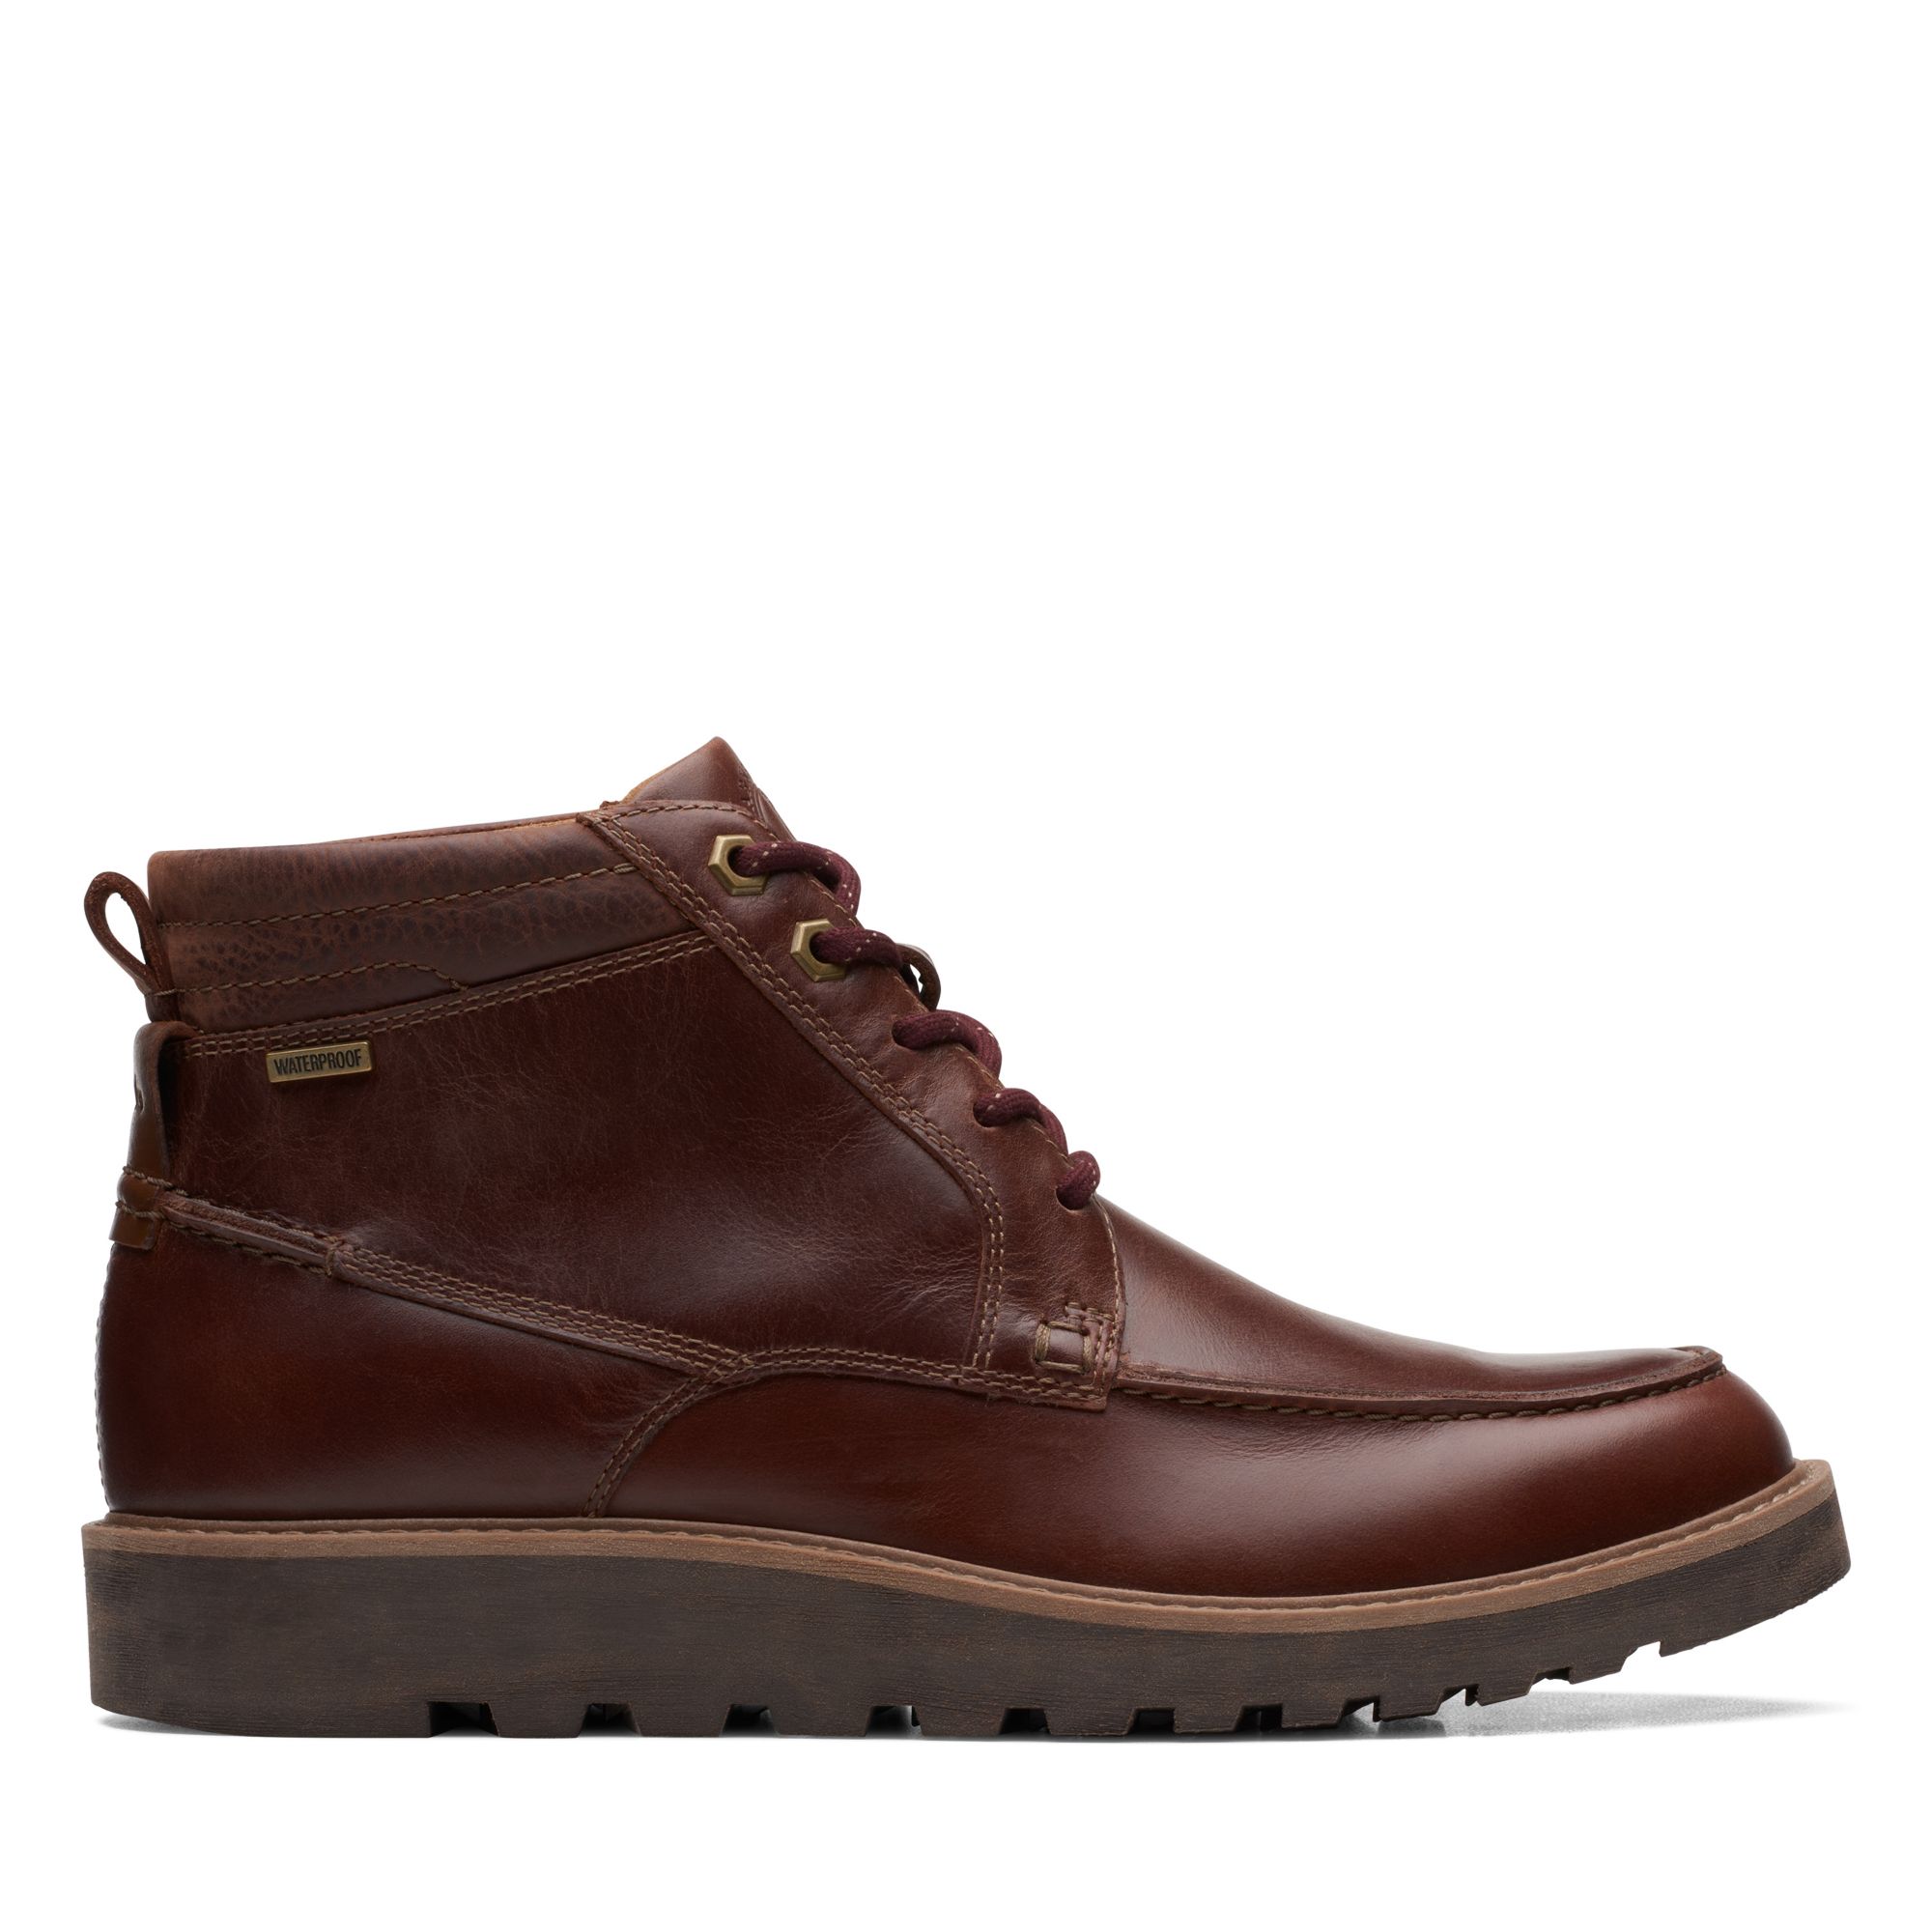 CLARKS HINSDALE MID